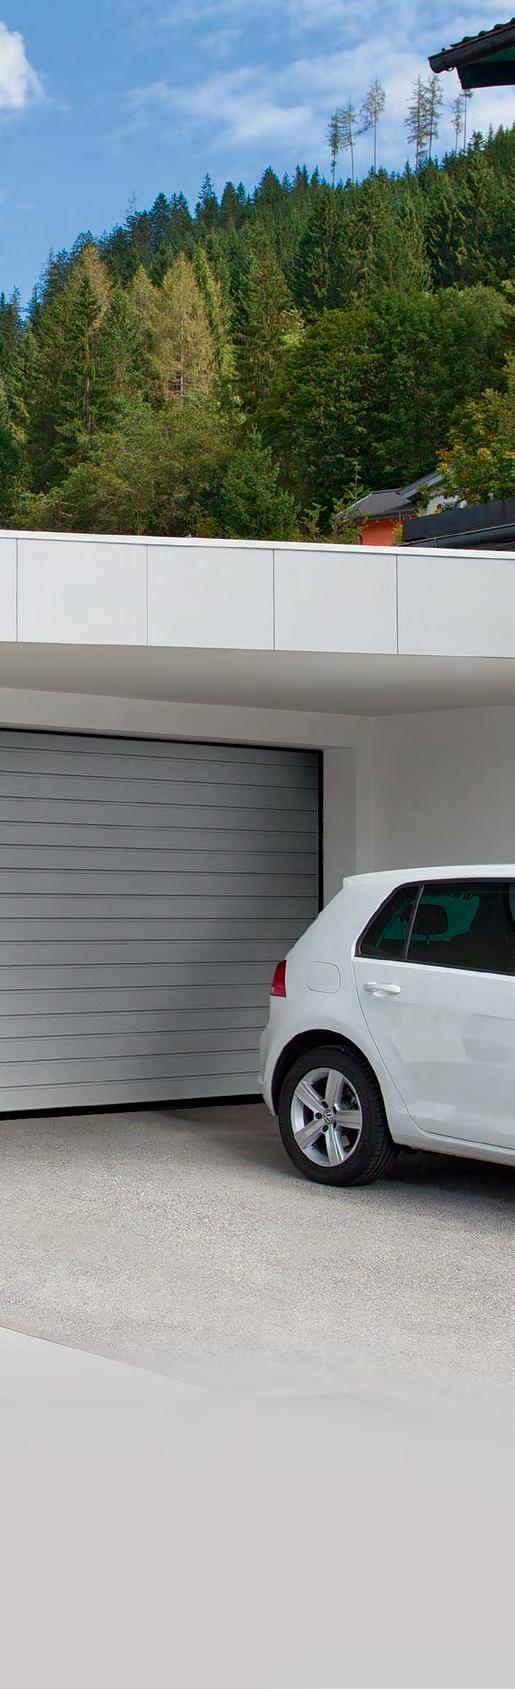 Functional Trend Garage Doors Reasonable price For moderate climate regions For